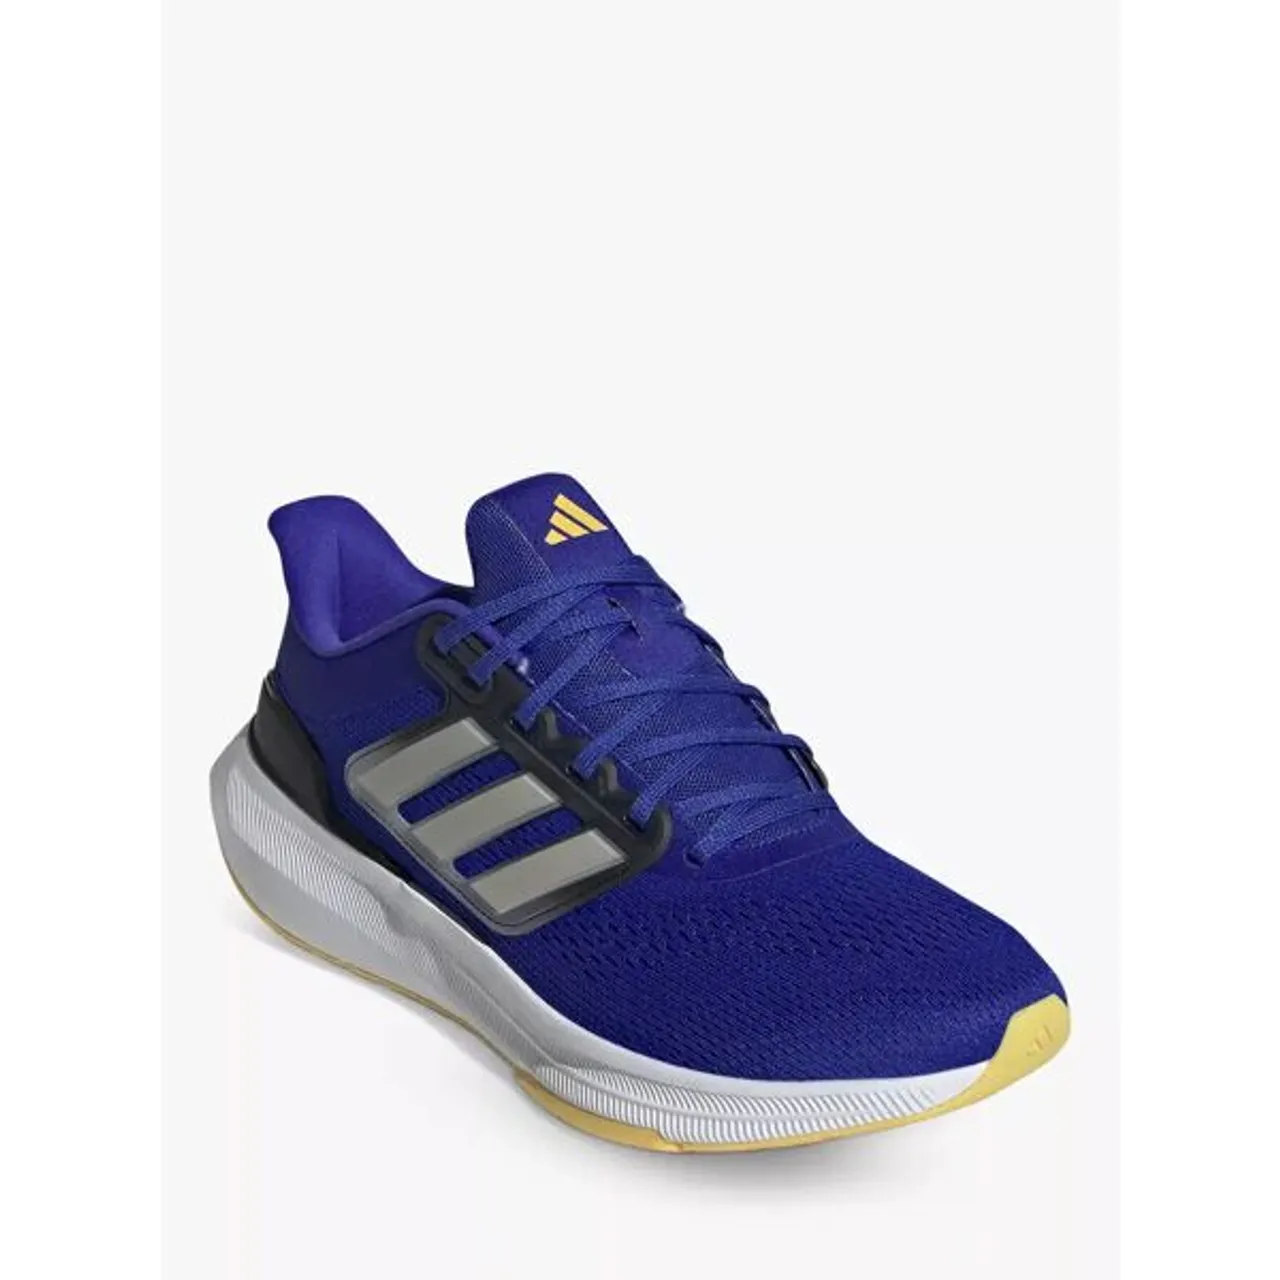 adidas Ultrabounce Men's Running Shoes - Lucid Blue/Grey - Male